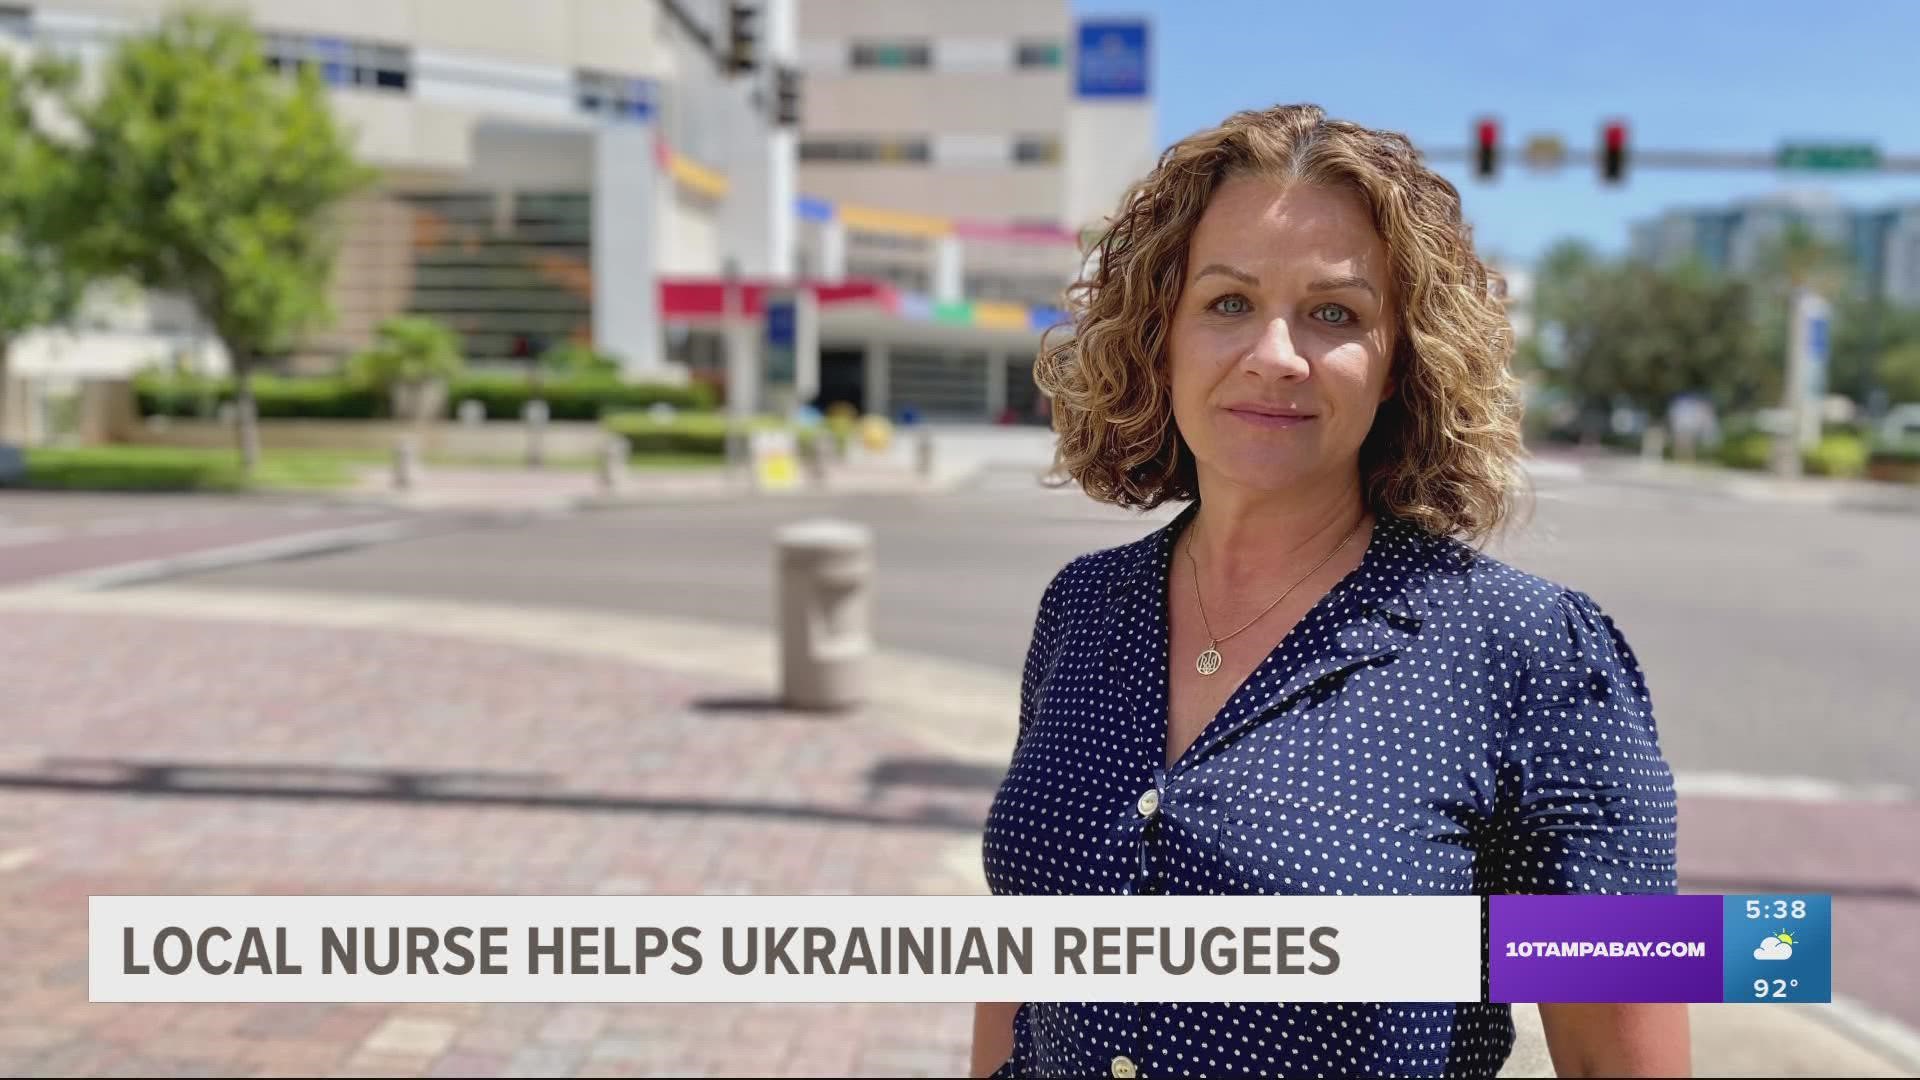 Lisa Prytula volunteered in an orphanage, refugee medical center and hospital in Poland assisting the millions of Ukrainians trying to escape war.